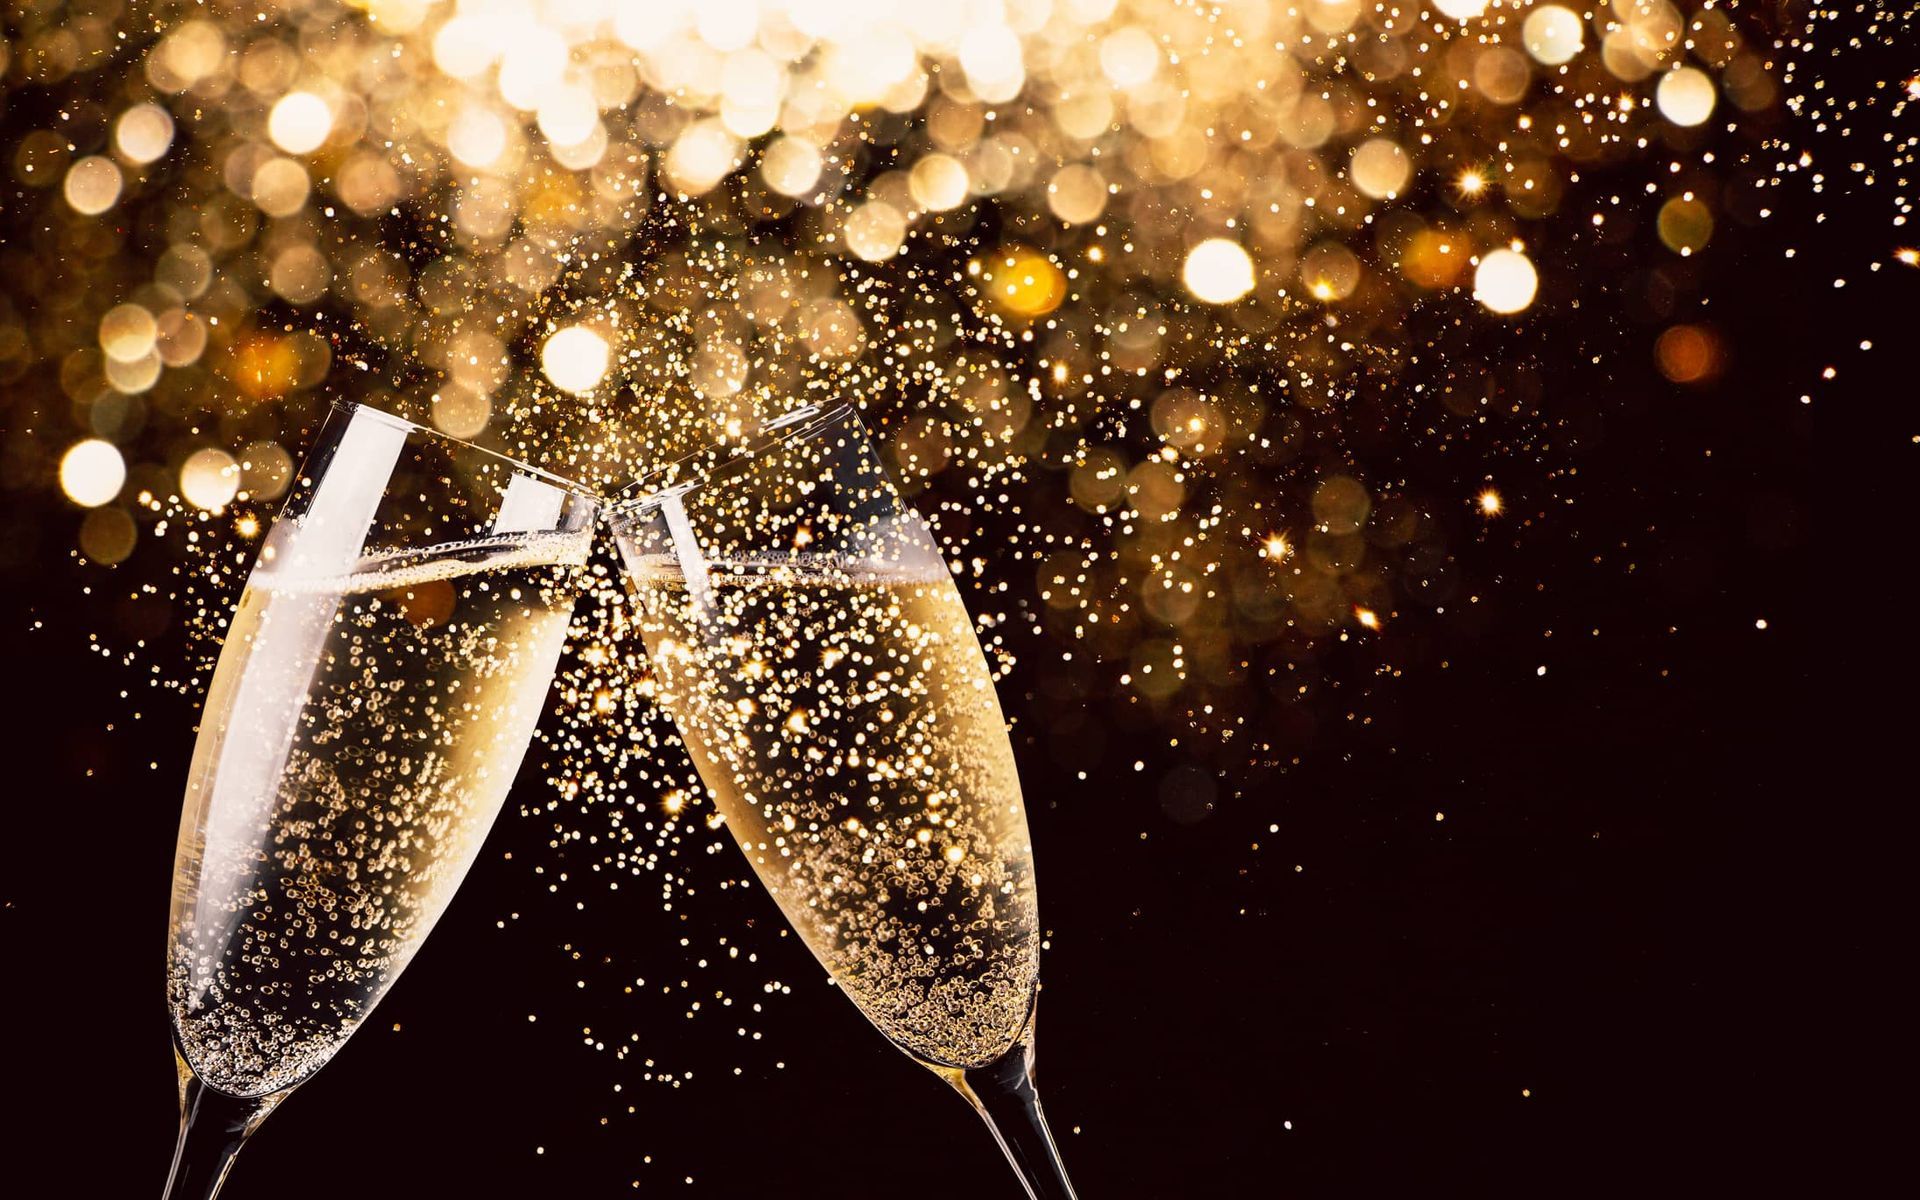 two glasses of champagne are toasting with sparklers in the background .